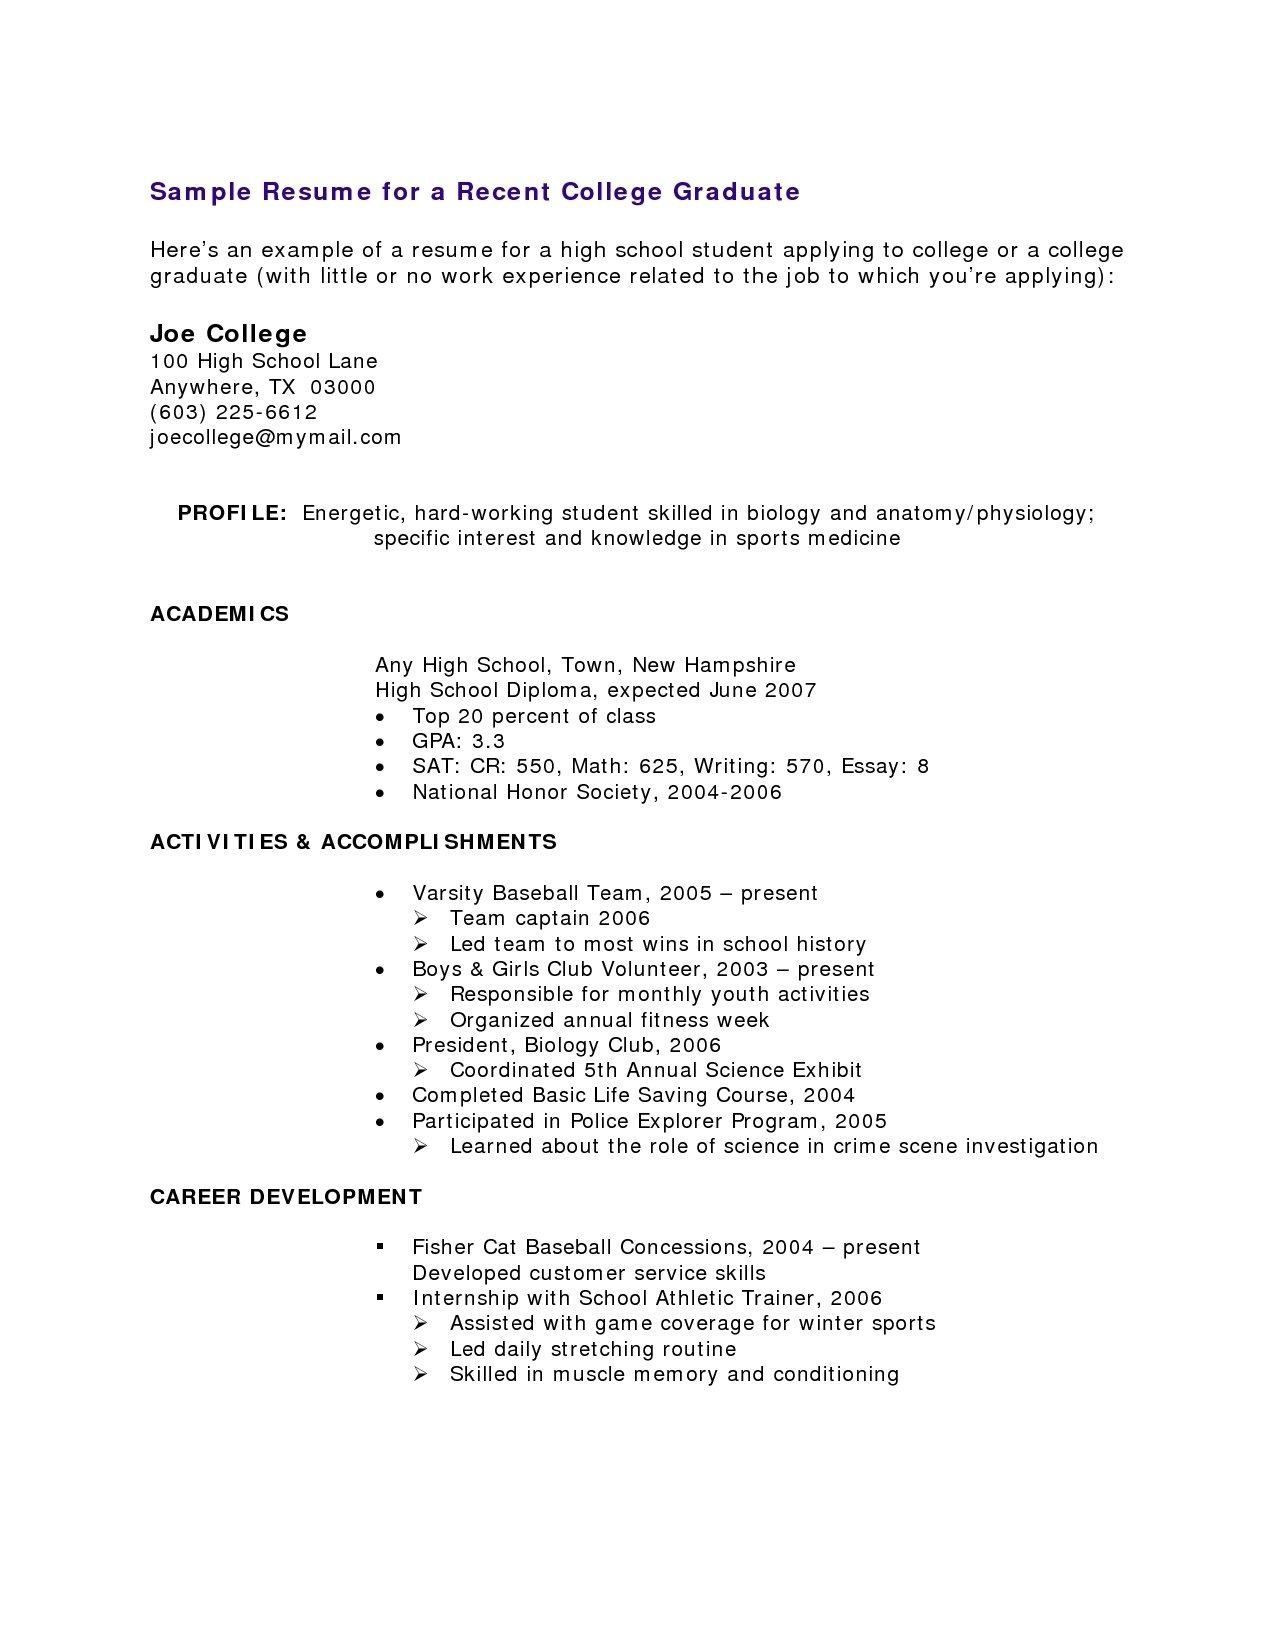 Sample Resume for someone with Little Job Experience Resume Examples Little Work Experience Resume Templates